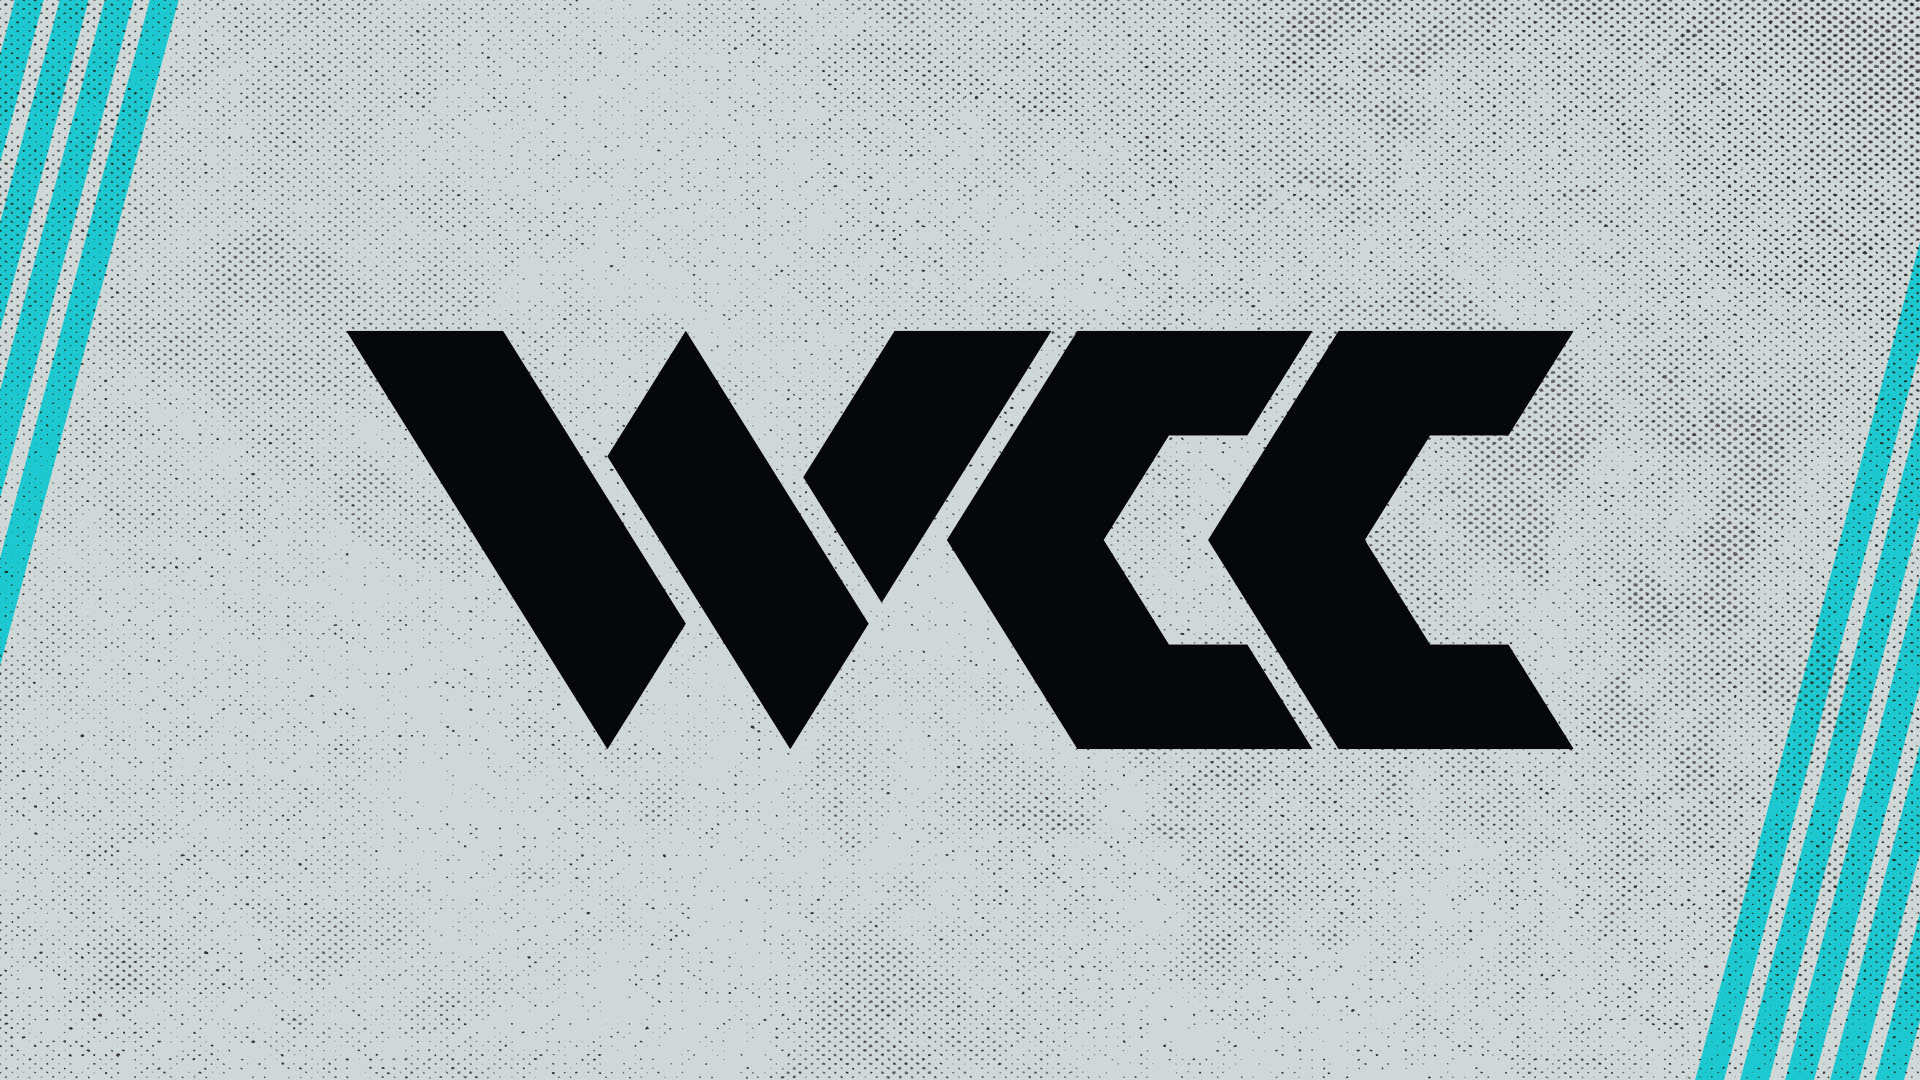 Wcc Projects :: Photos, videos, logos, illustrations and branding :: Behance